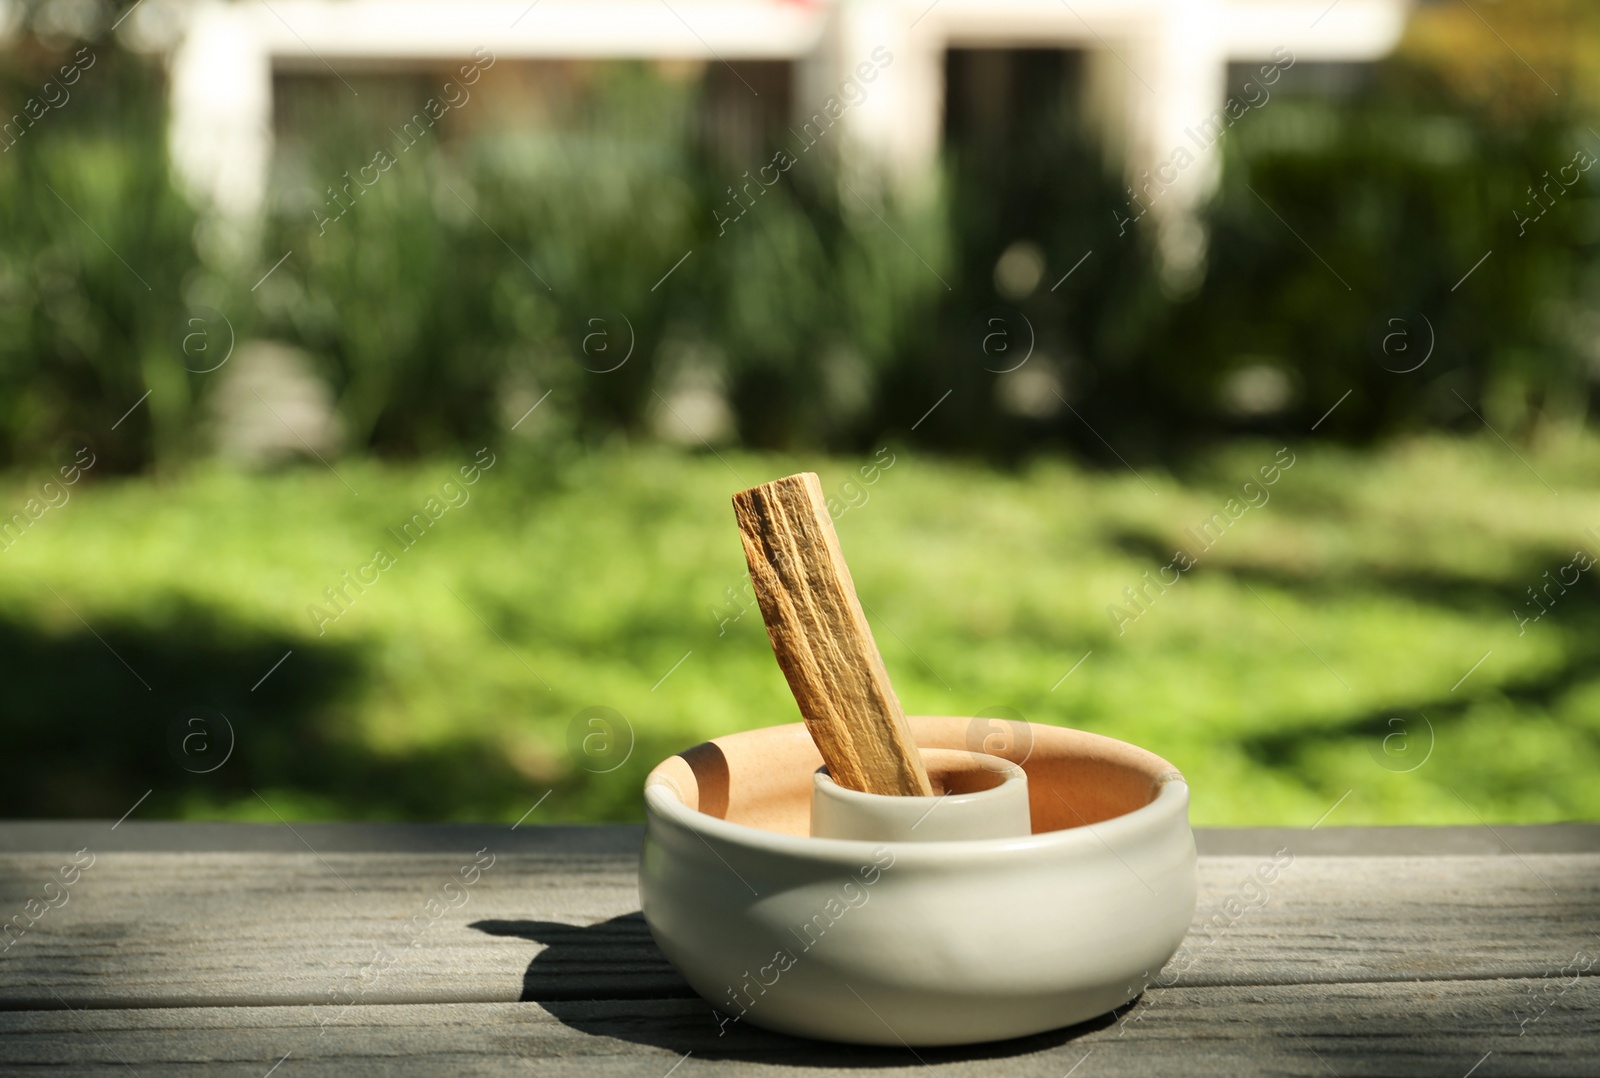 Photo of Palo santo stick in holder on wooden table outdoors